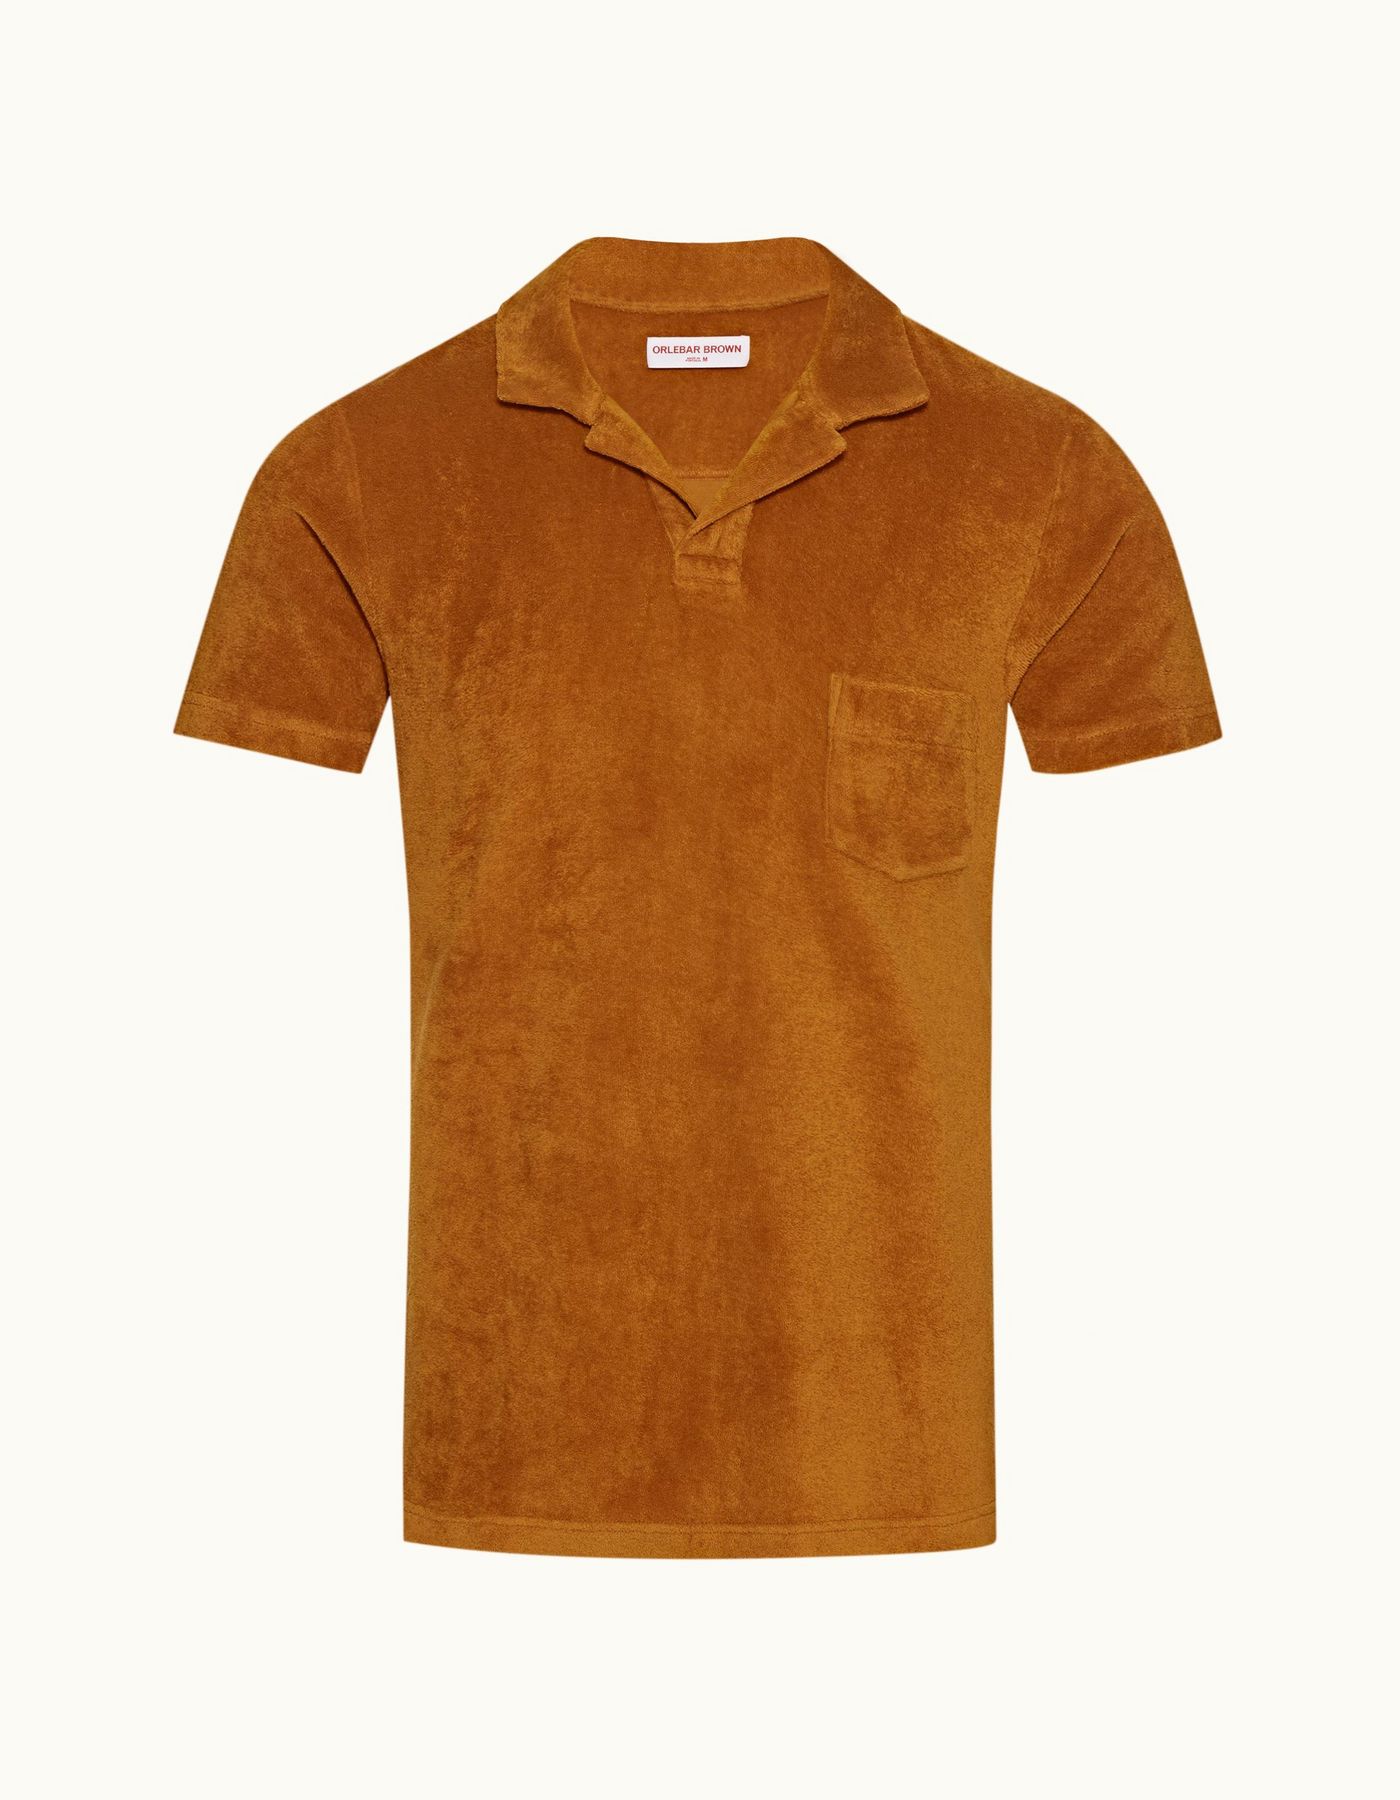 Terry Towelling - Mens Amber Tailored Fit Towelling Resort Polo Shirt